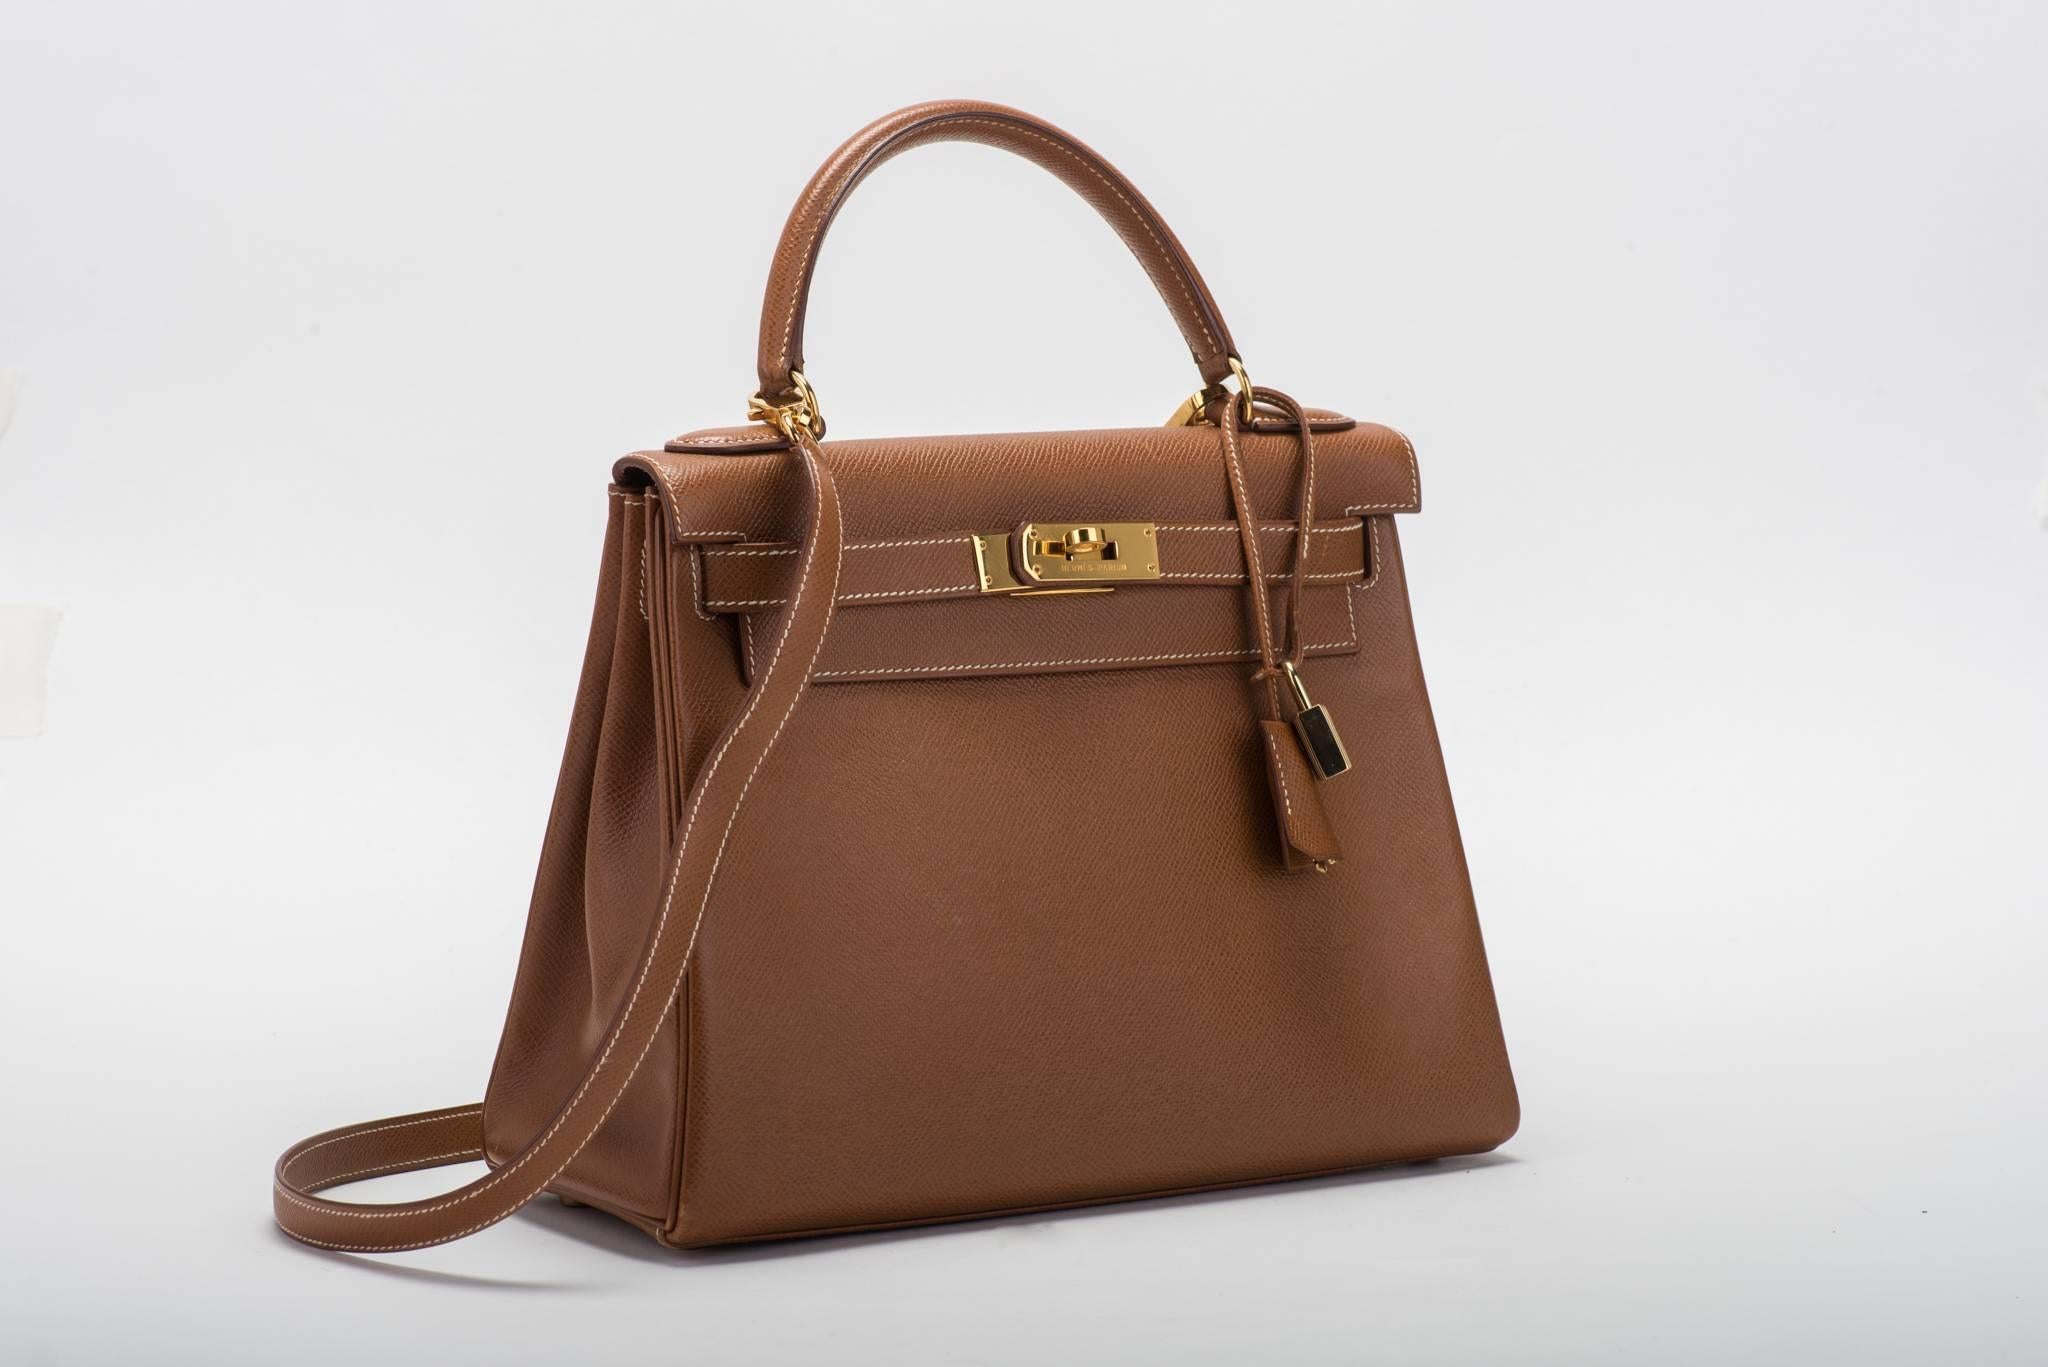 Hermes Kelly retourne 28cm in gold epsom leather and gold tone hardware. Detachable strap. Date stamp 